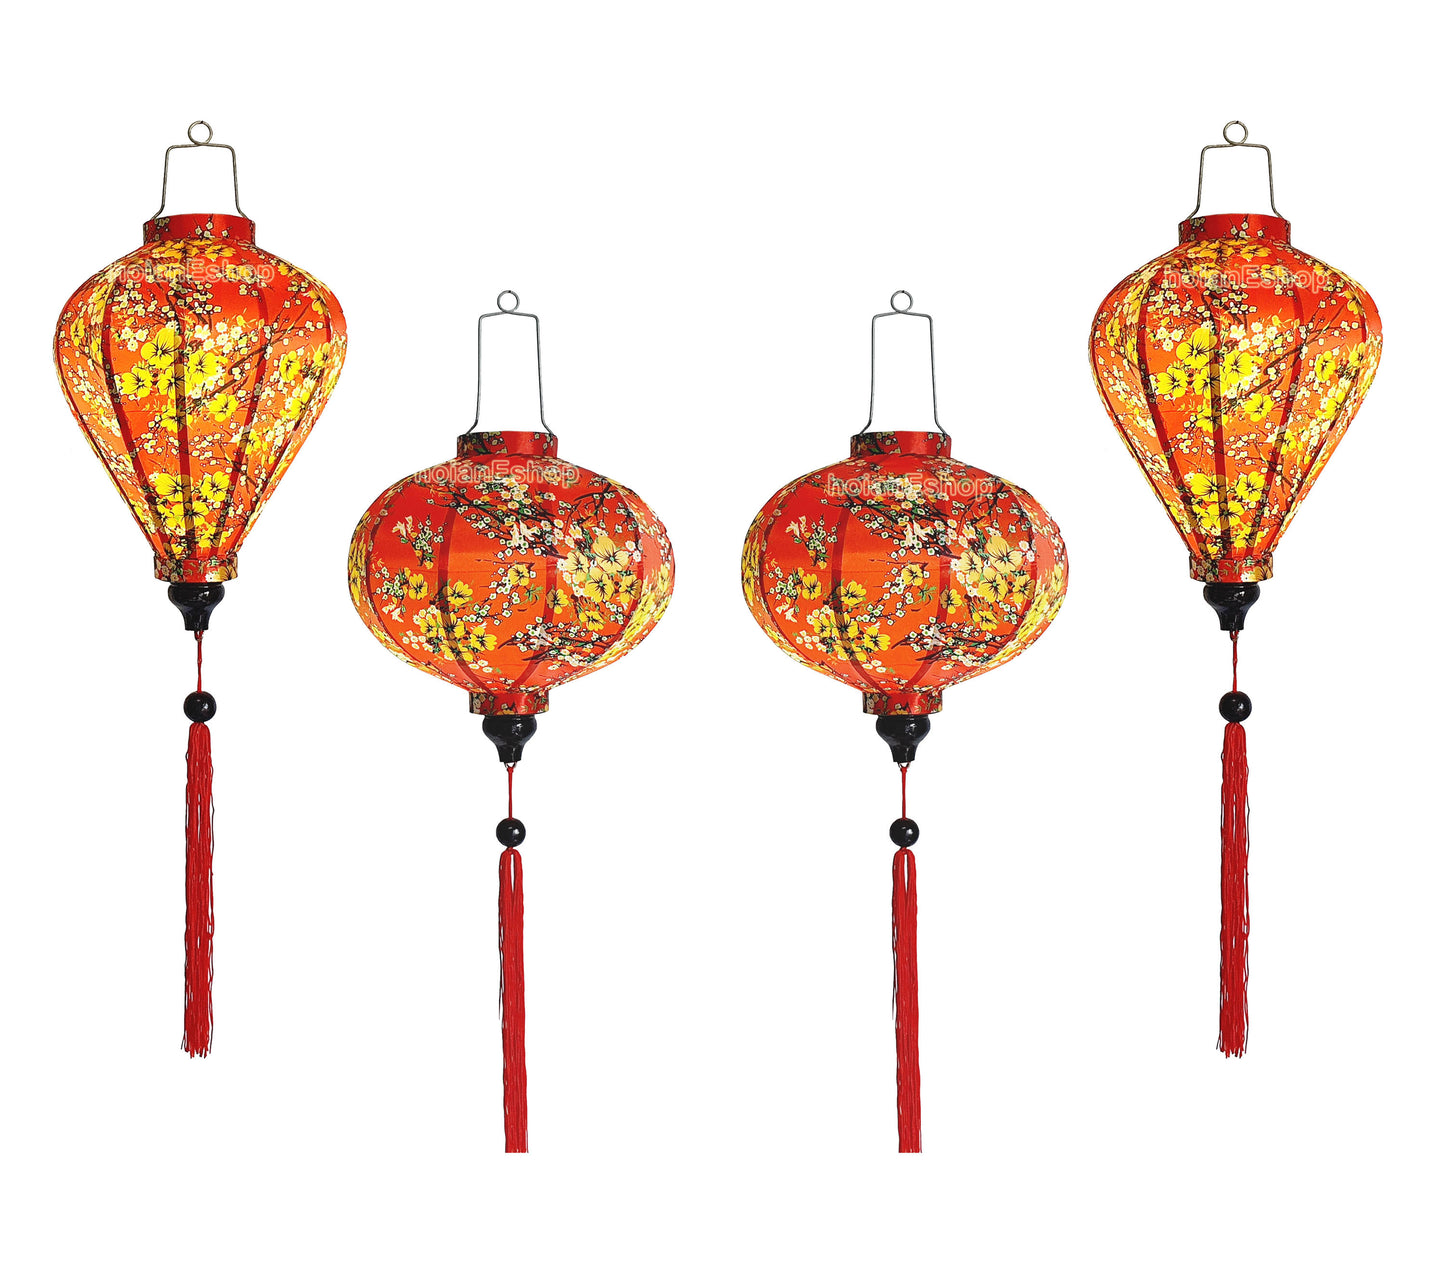 Set 4 Vietnam Silk Lanterns with Apricot flowers fabric for New Year Decorations - TET Decorations - Cherry blossom fabric for Wedding decor